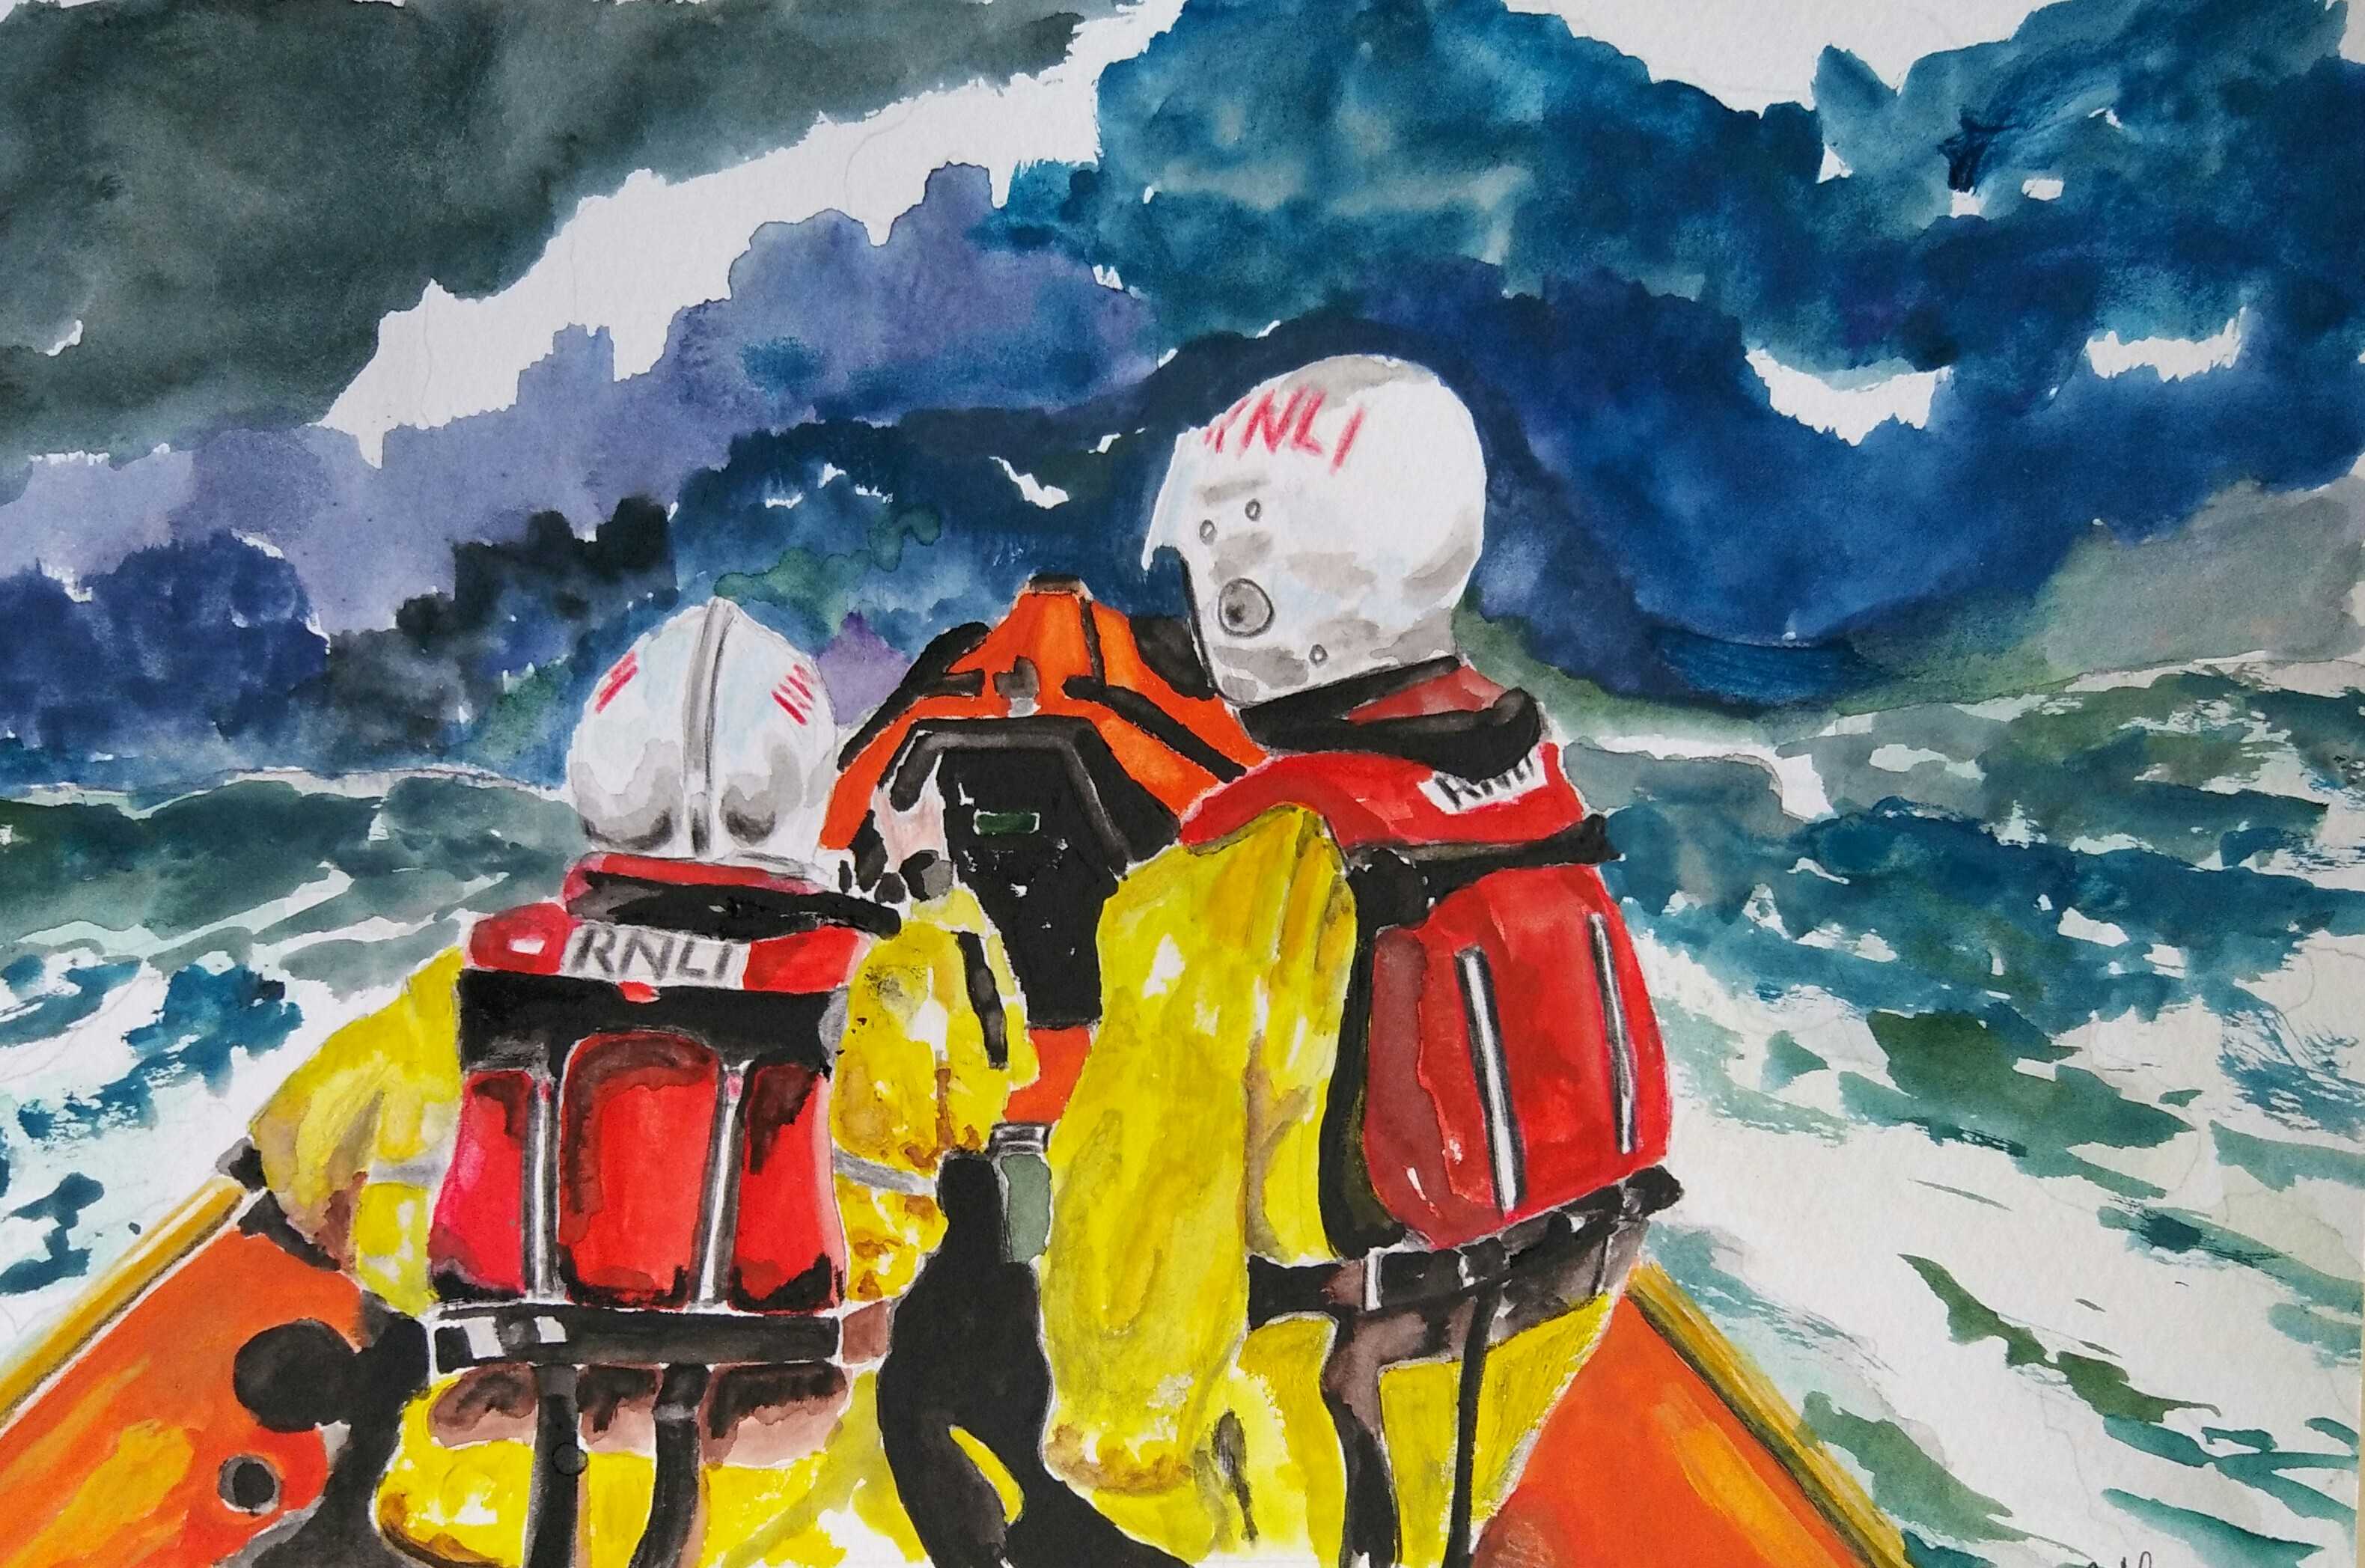 Facing the Storm - Watercolour 10"x12" Unframed (Donated to RNLI)